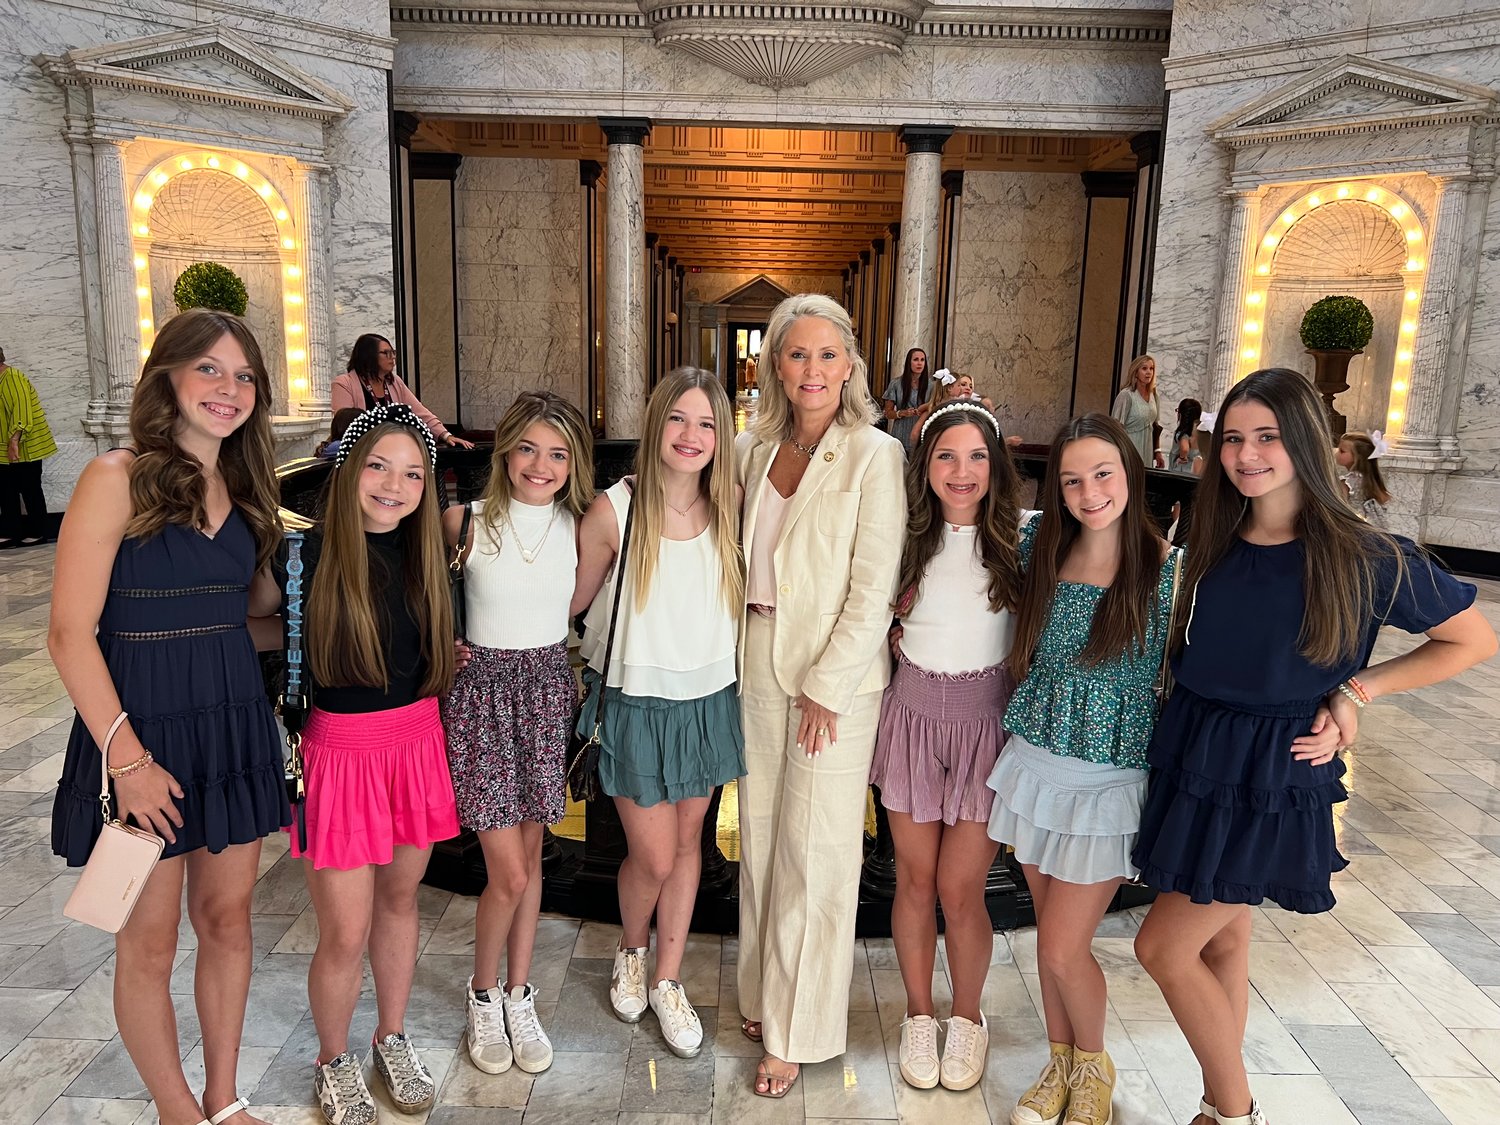 Participants of the third annual Girl's Day at the Capitol on June 17 pose with State Rep. Jill Ford. Pictured, from left: Naomi Olszewski, Ava Bondurant, Sloane Clack, Bella Brown, Rep. Jill Ford, Annie Craig, Lizzie Kate Herrington, and Addison Kellum.